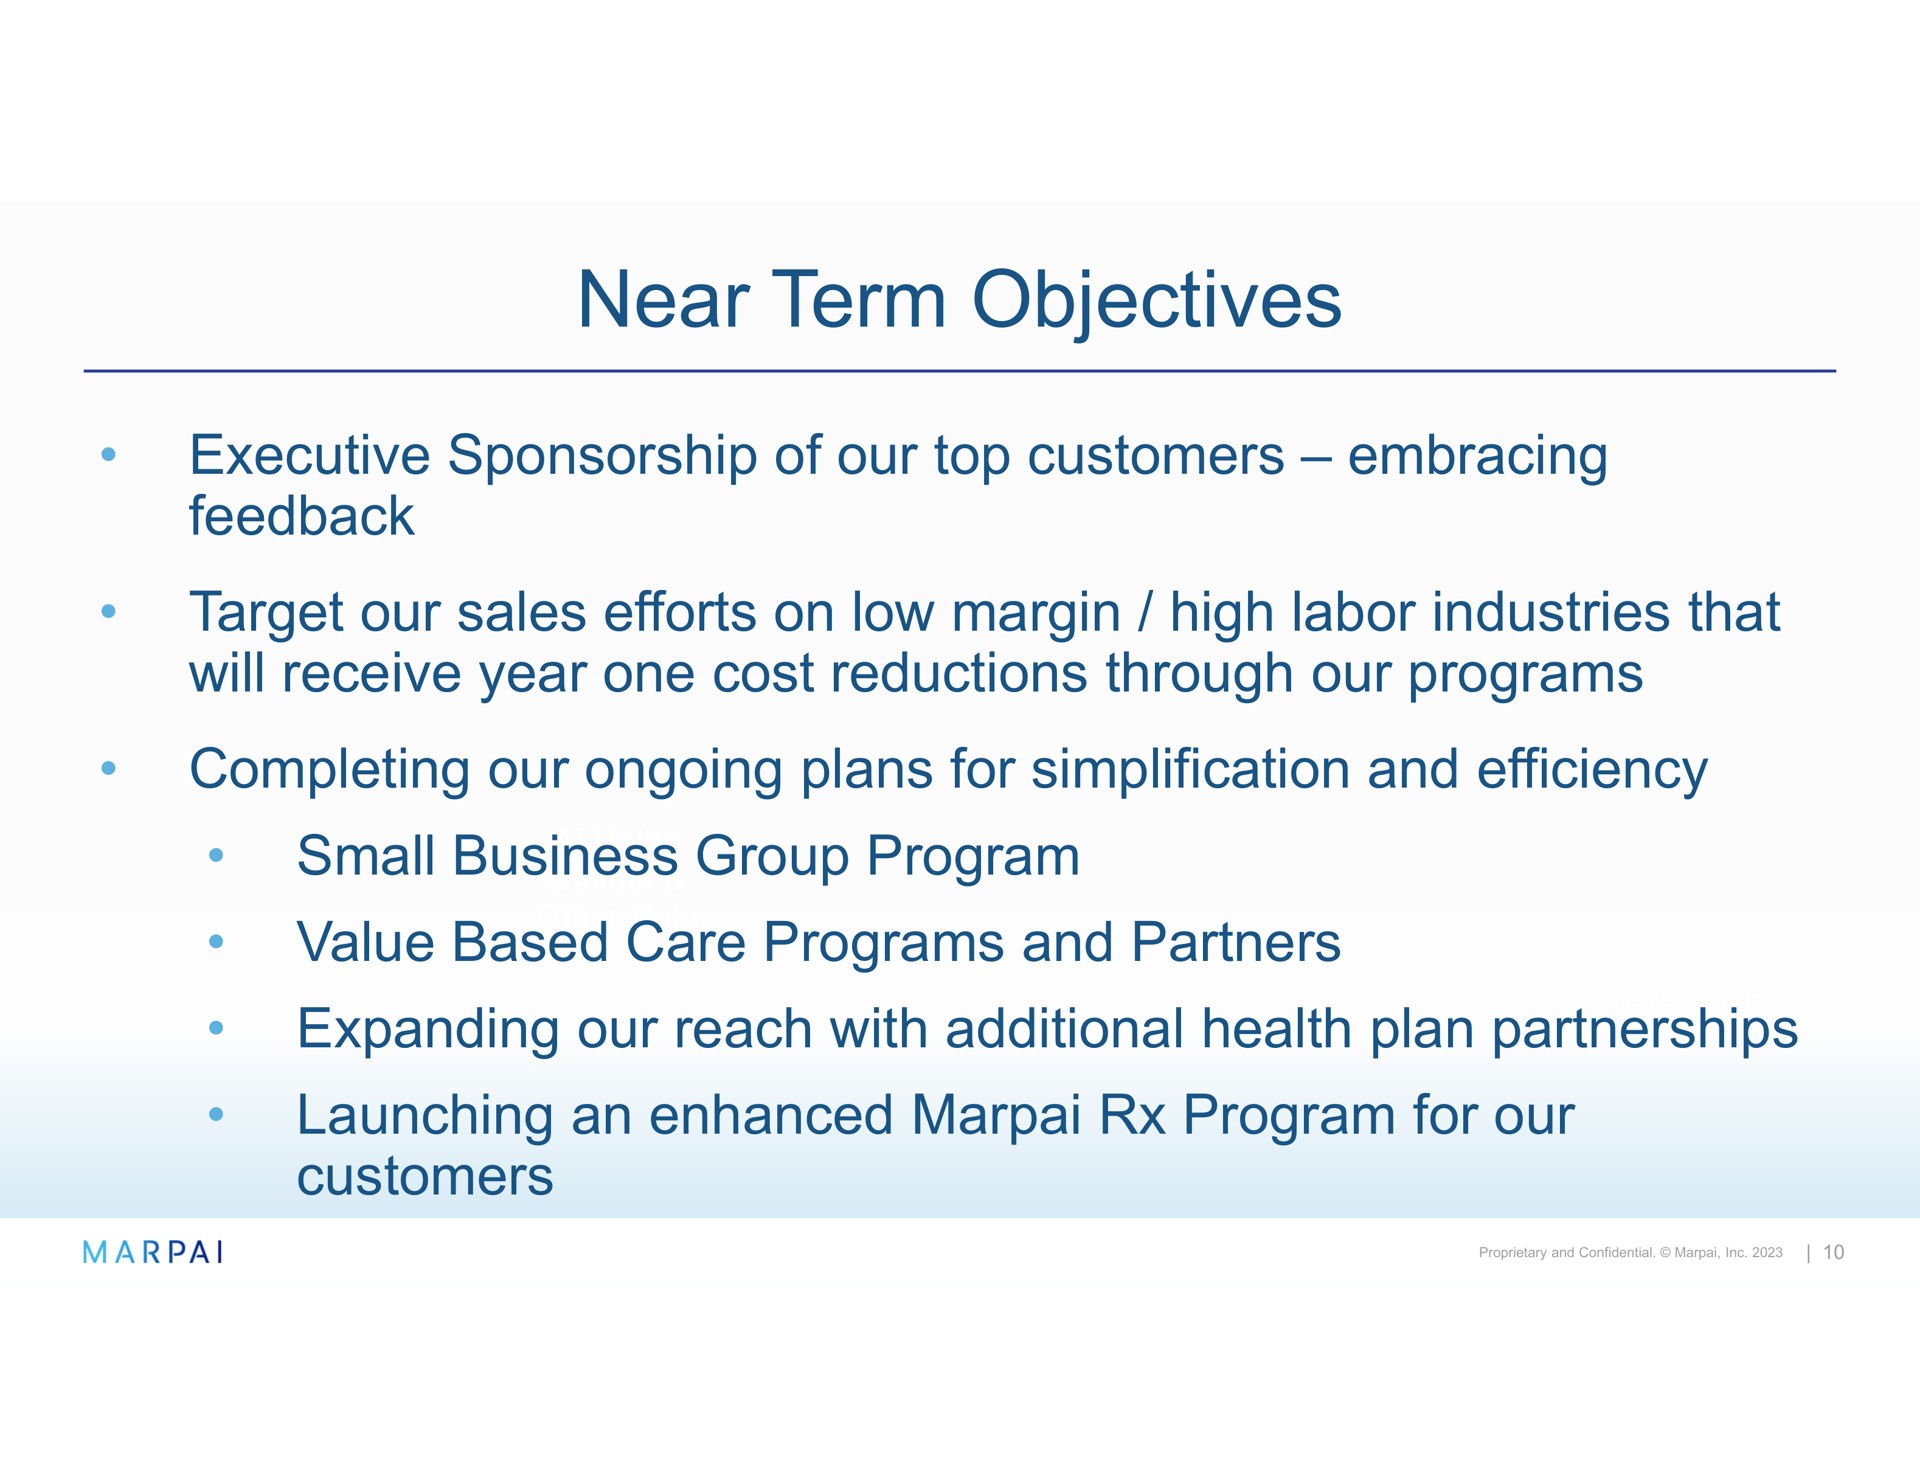 near term objectives executive sponsorship of our top customers embracing feedback target our sales efforts on low margin high labor industries that will receive year one cost reductions through our programs completing our ongoing plans for simplification and efficiency small business group program value based care programs and partners expanding our reach with additional health plan partnerships launching an enhanced program for our customers | Marpai